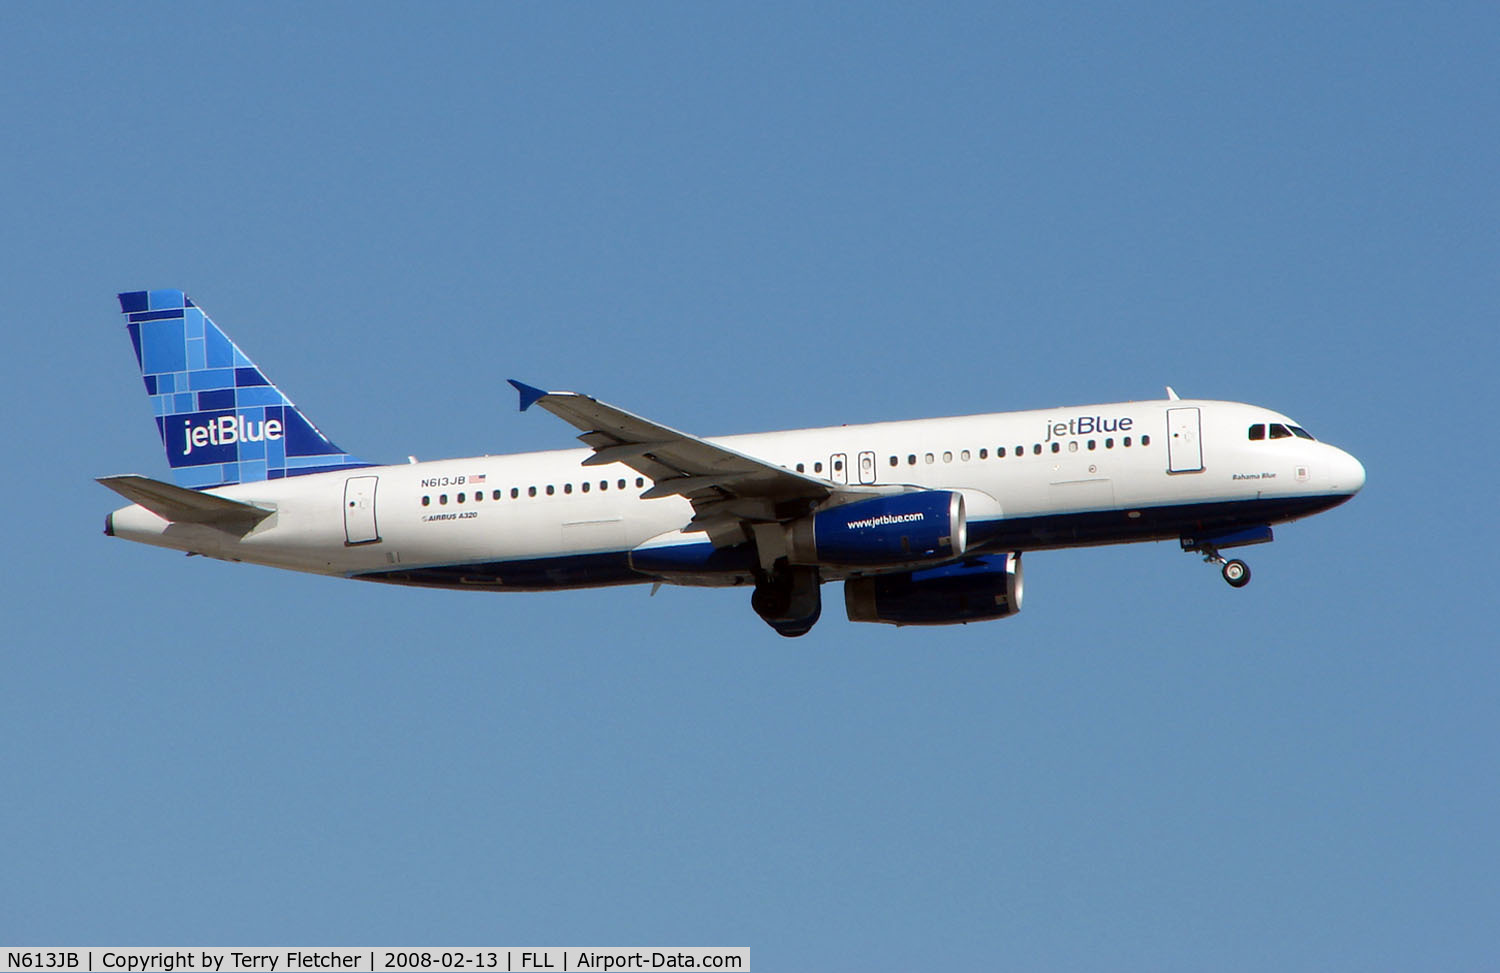 N613JB, 2005 Airbus A320-232 C/N 2449, JetBlue A320 climbs away from Ft Lauderdale Int in Feb 2008